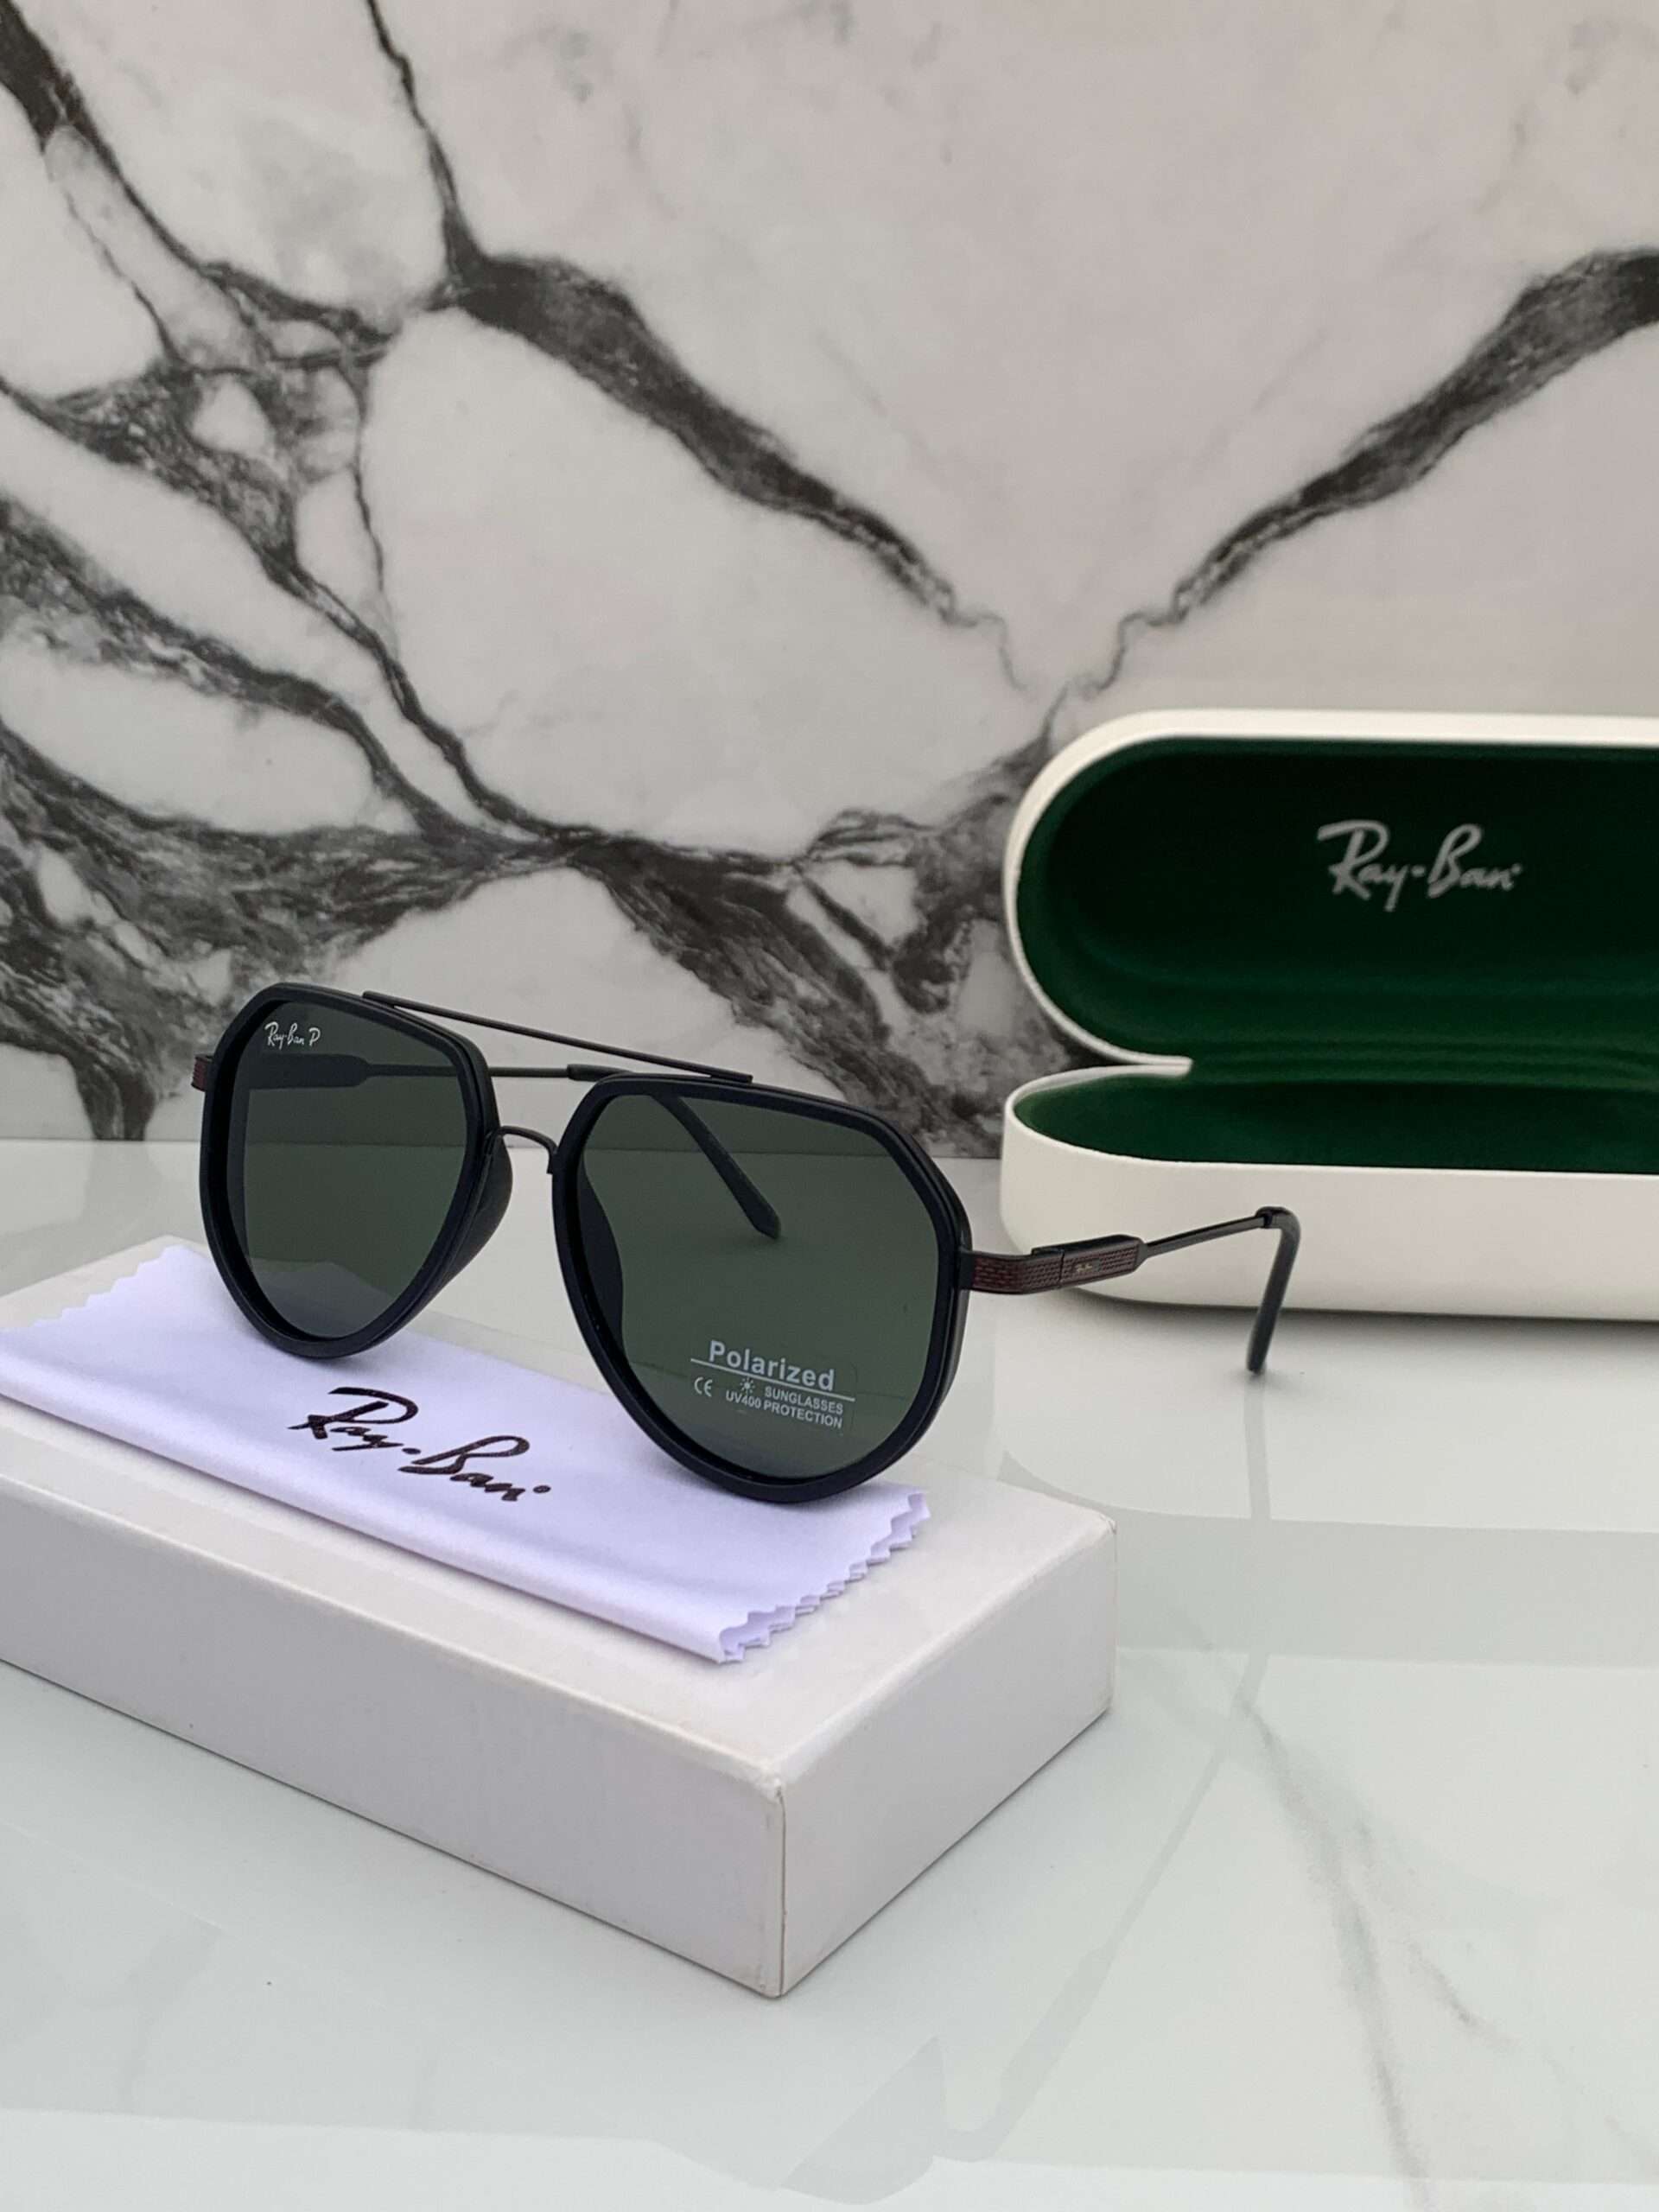 How to Spot Fake Ray-Ban Sunglasse - Discounted Sunglasses